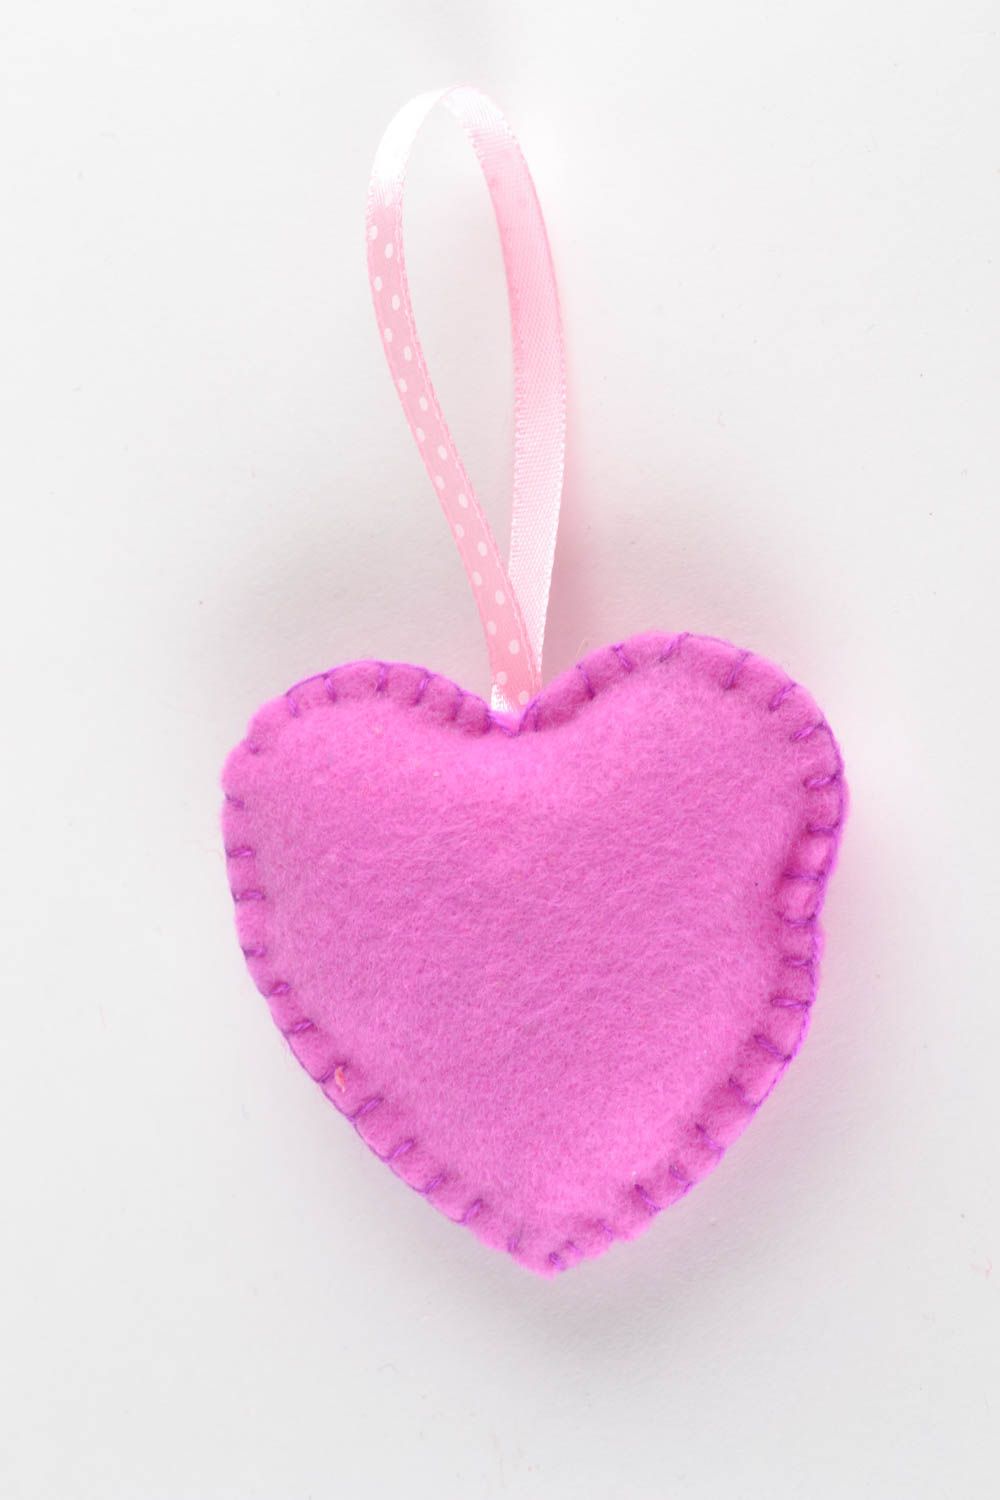 Interior pendant in the shape of heart photo 4